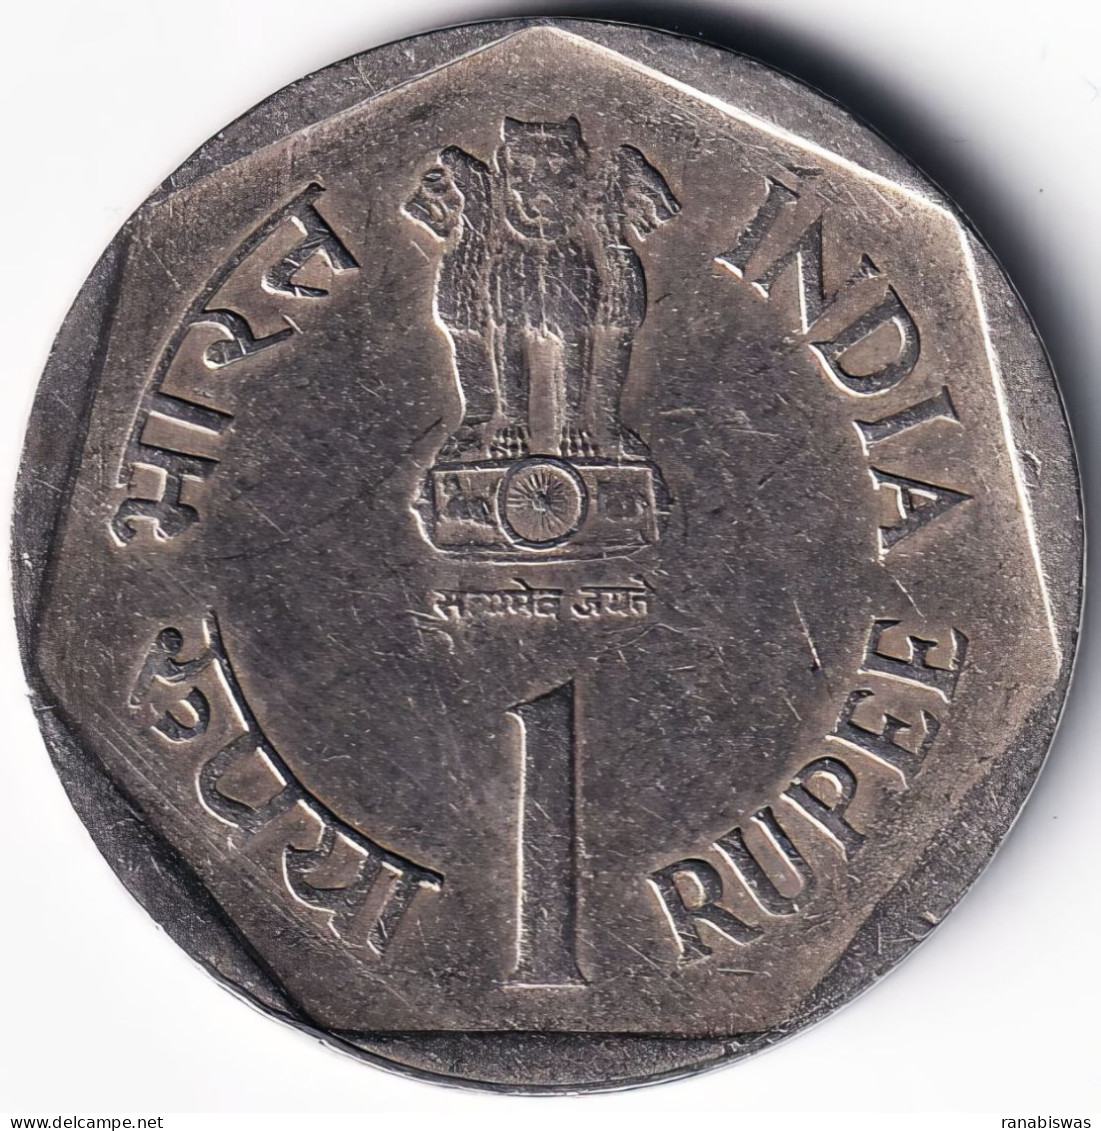 INDIA COIN LOT 112, 1 RUPEE 1987, SMALL FARMERS, HYDERABAD MINT, XF, SCARE - Inde